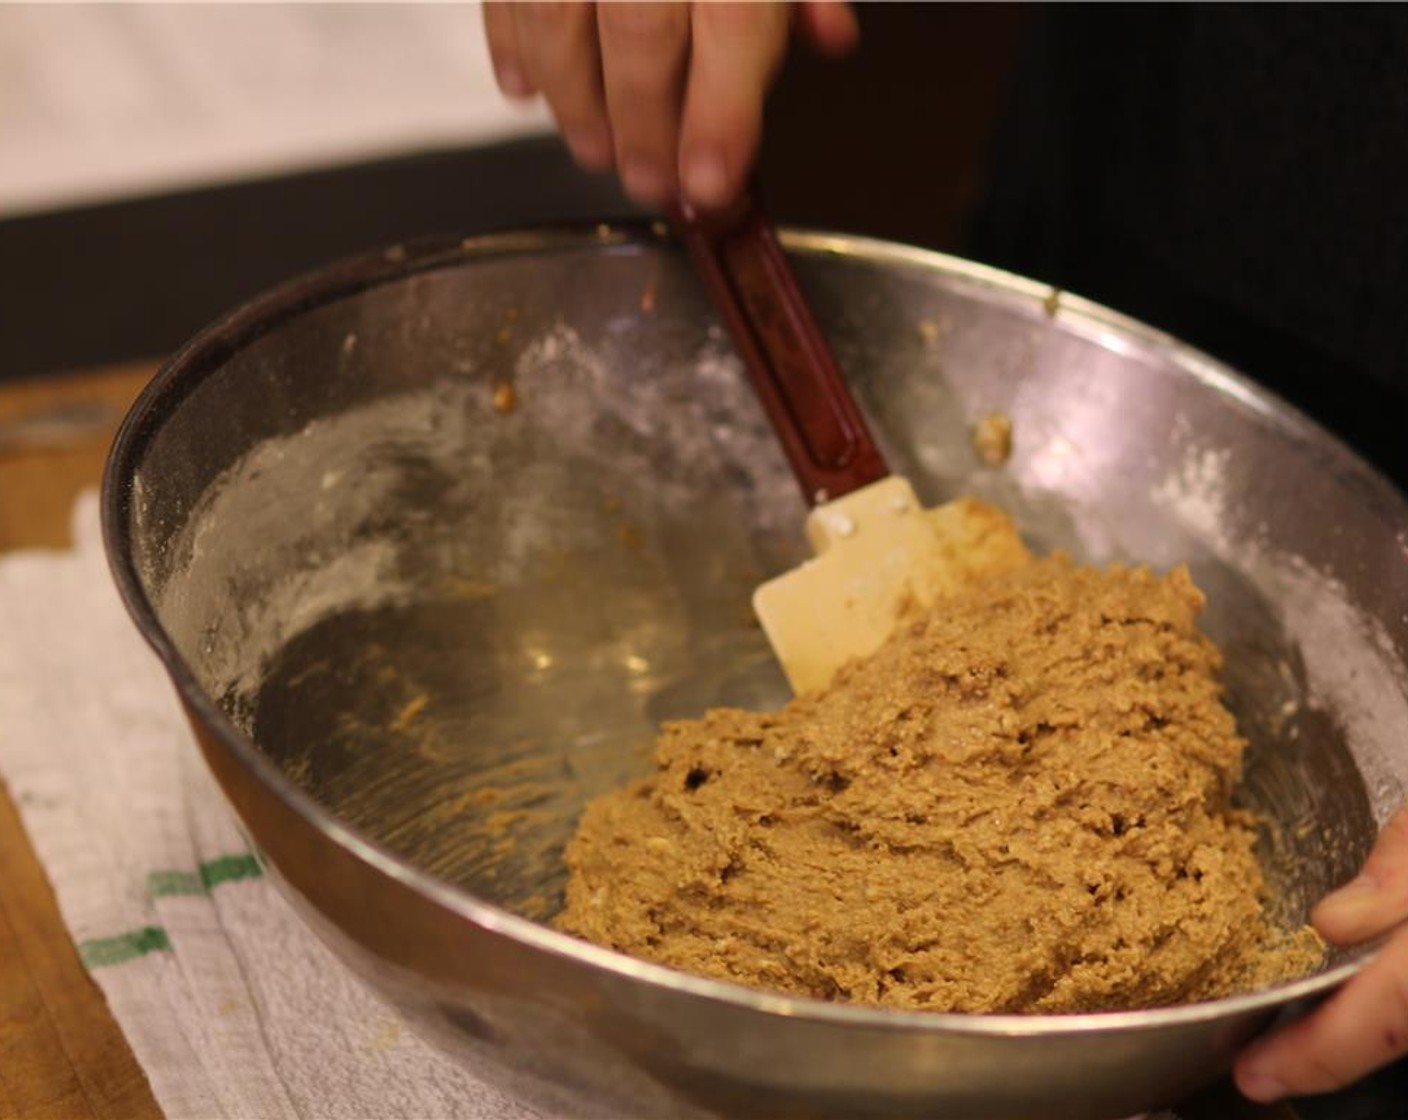 step 1 Combine the Butter (1 cup) with the Graham Cracker Crumbs (2 cups), Powdered Confectioners Sugar (2 cups), and Peanut Butter (1 cup). Stir until mixed together.